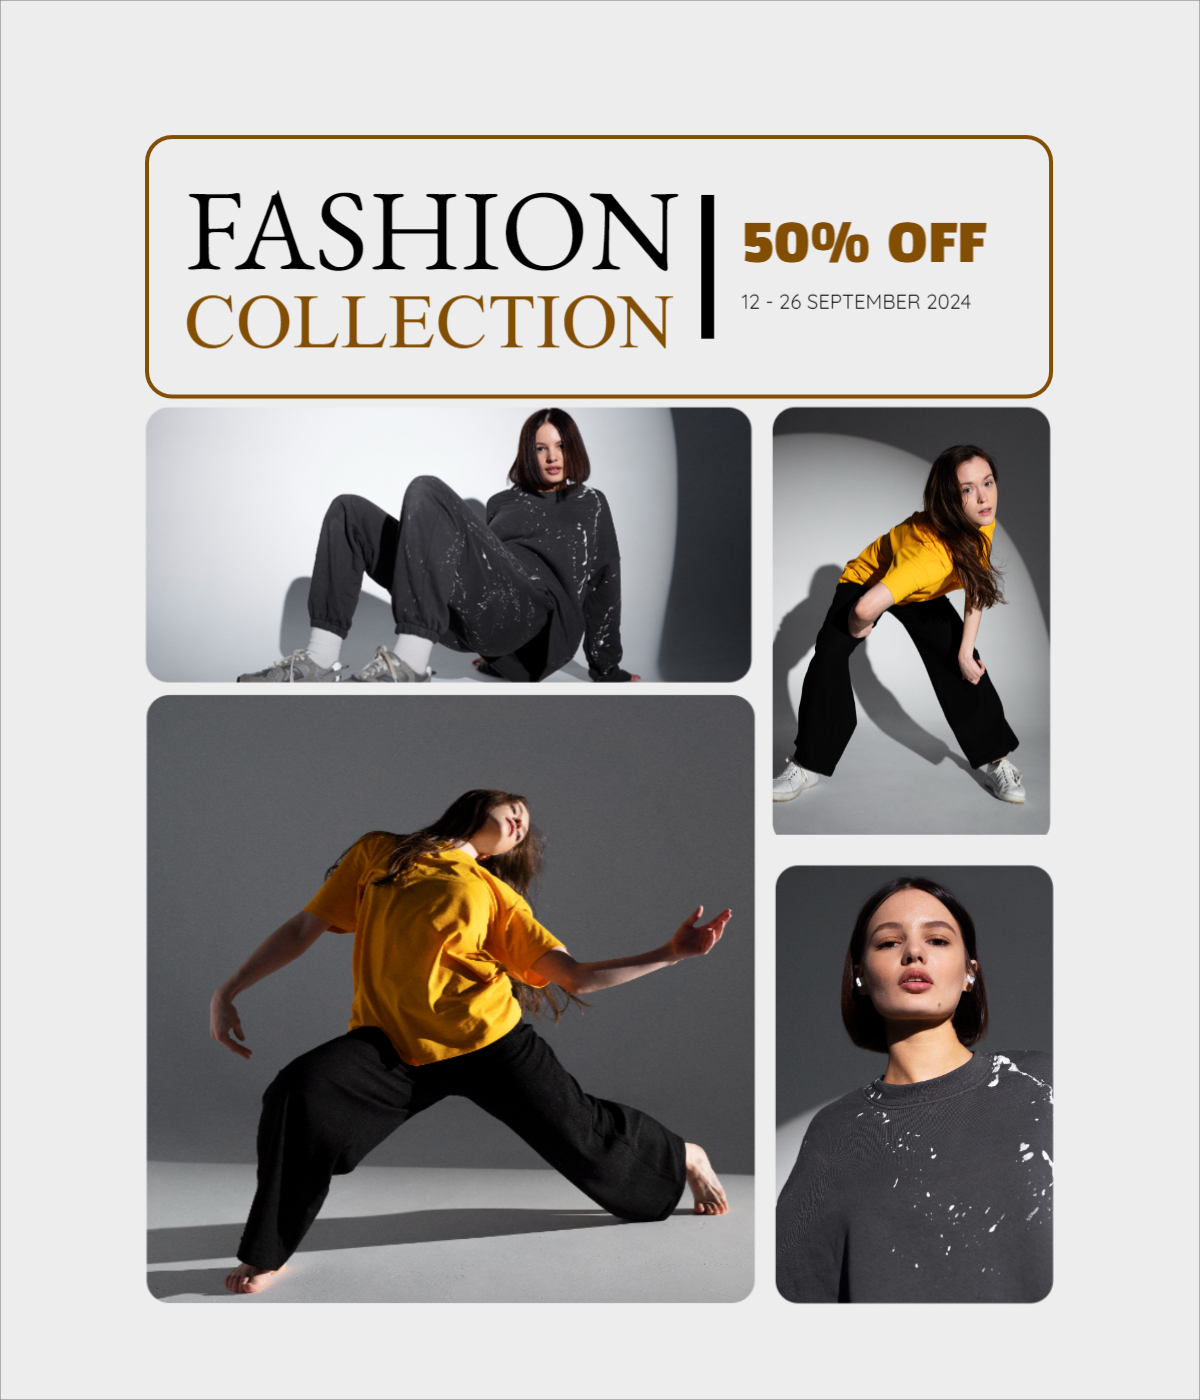 Fashion Collection Sale Poster download for free